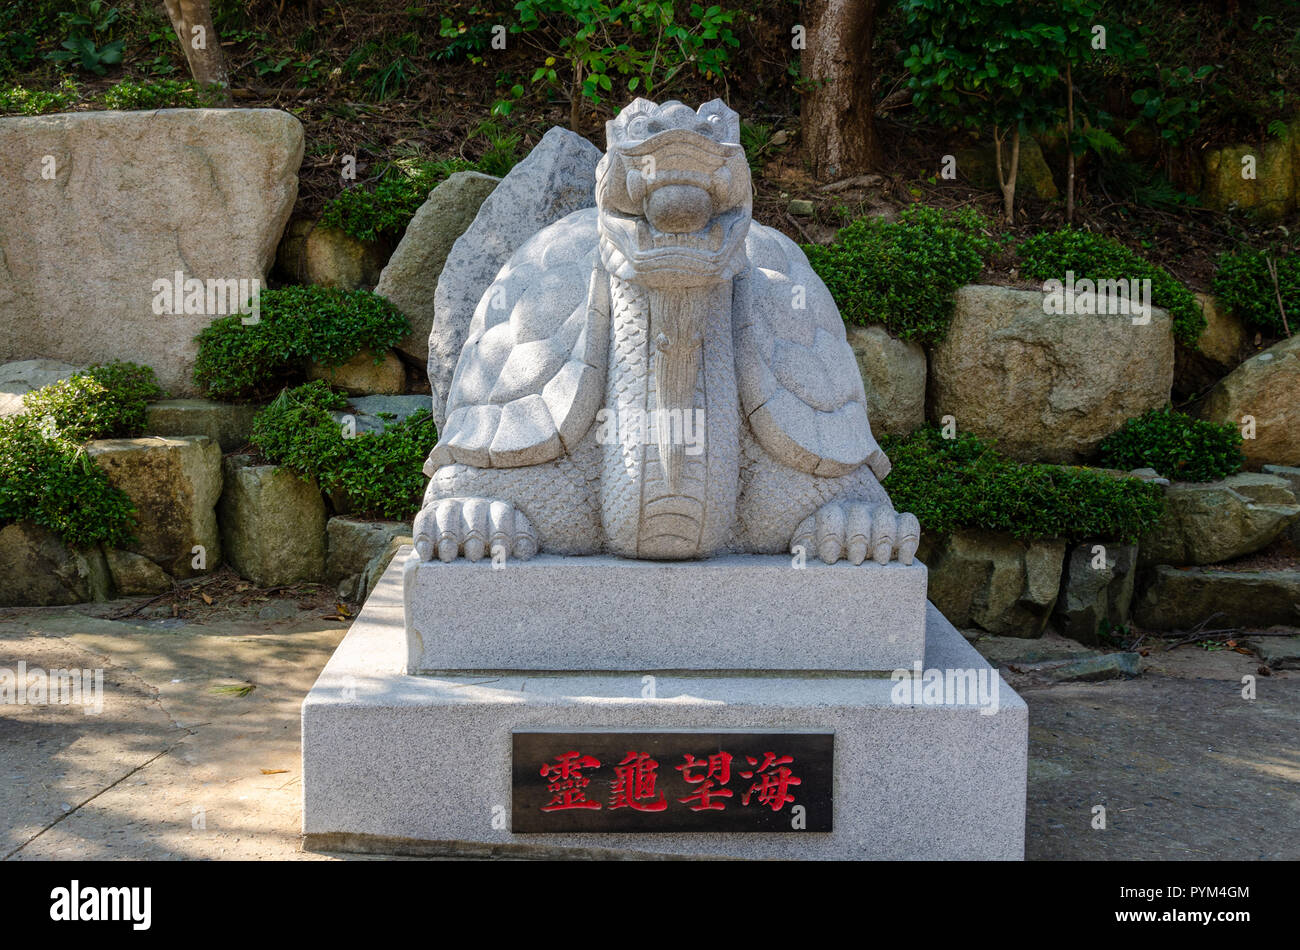 A sculpture of a tortoise in stone at Haedong Yonggung Temple in Busan, South Korea. Stock Photo